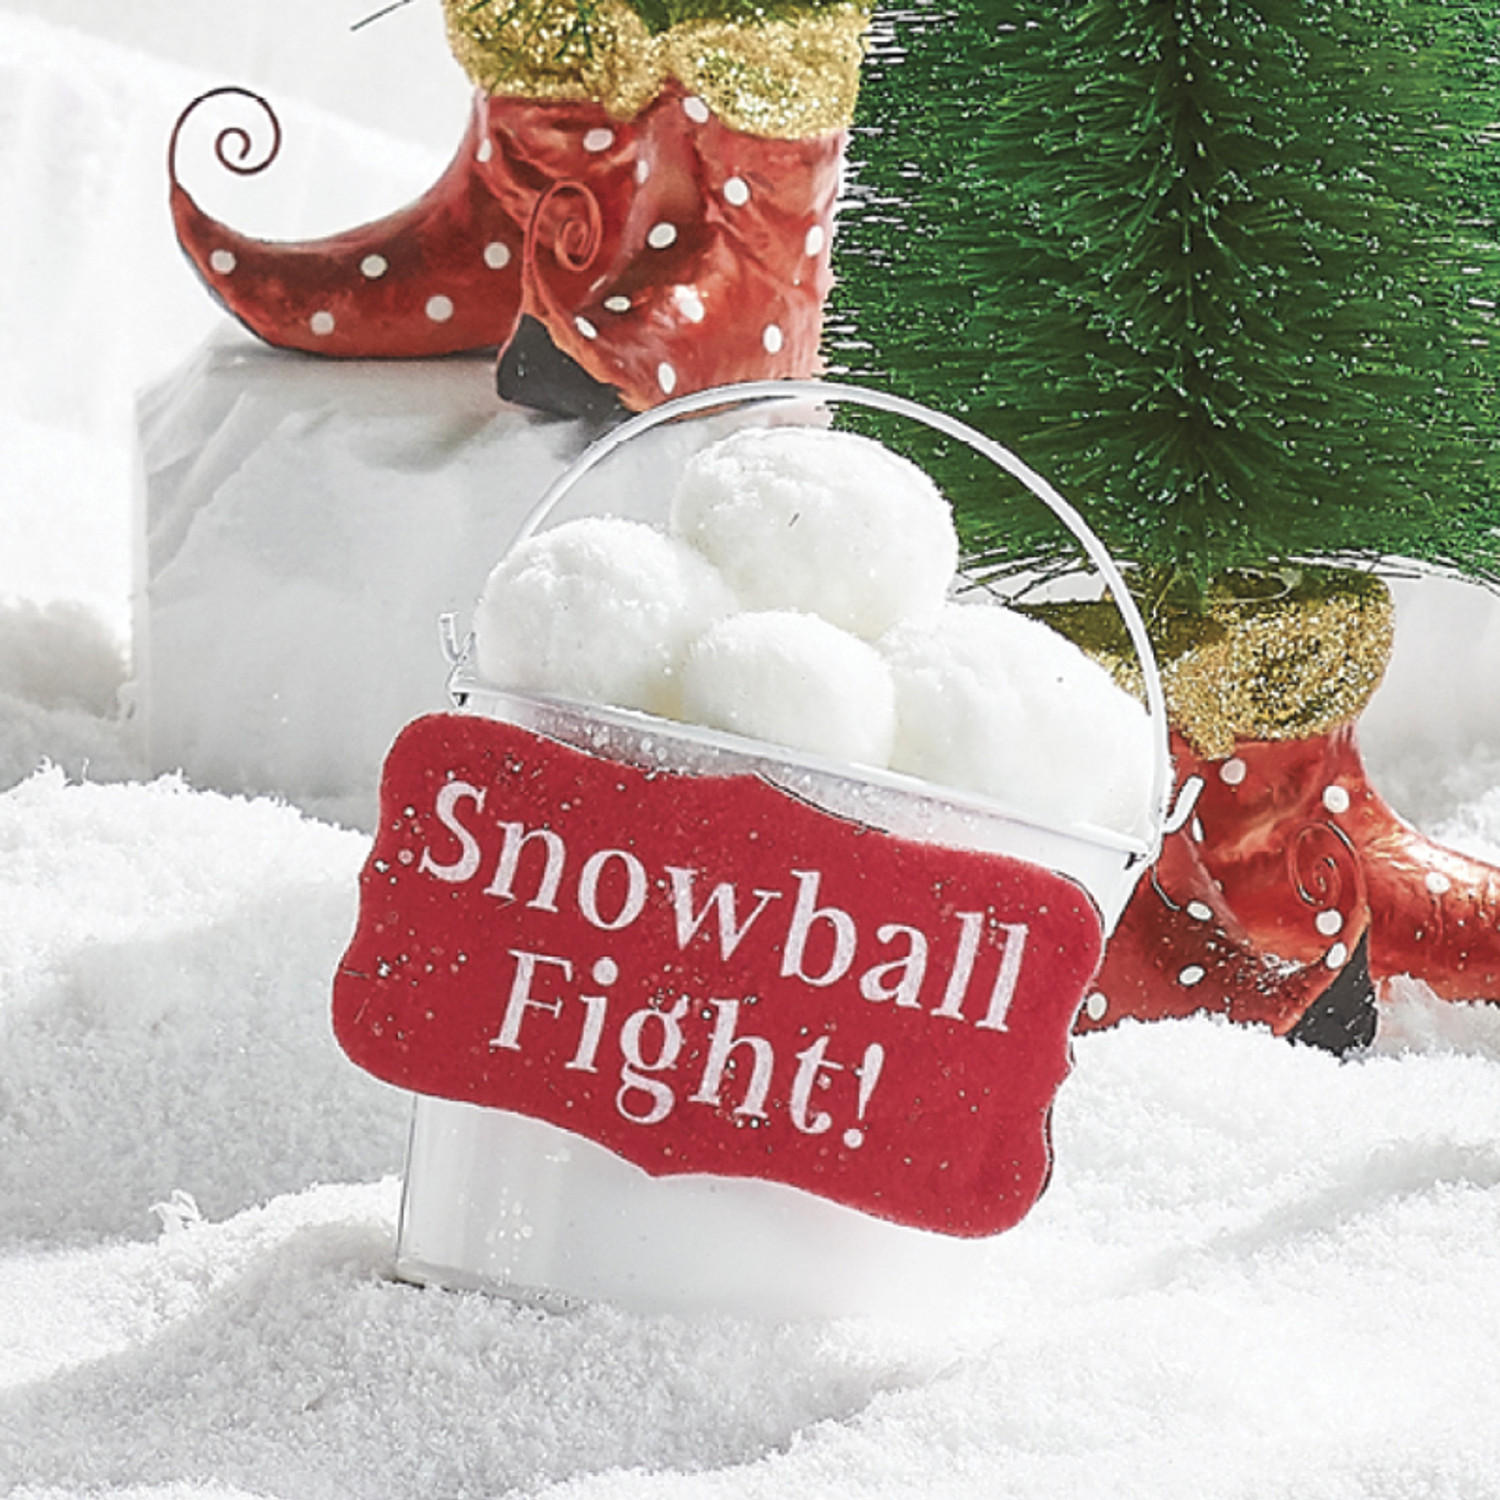 Make Your Own Snowballs for Indoor or Outdoor Snowball Fights